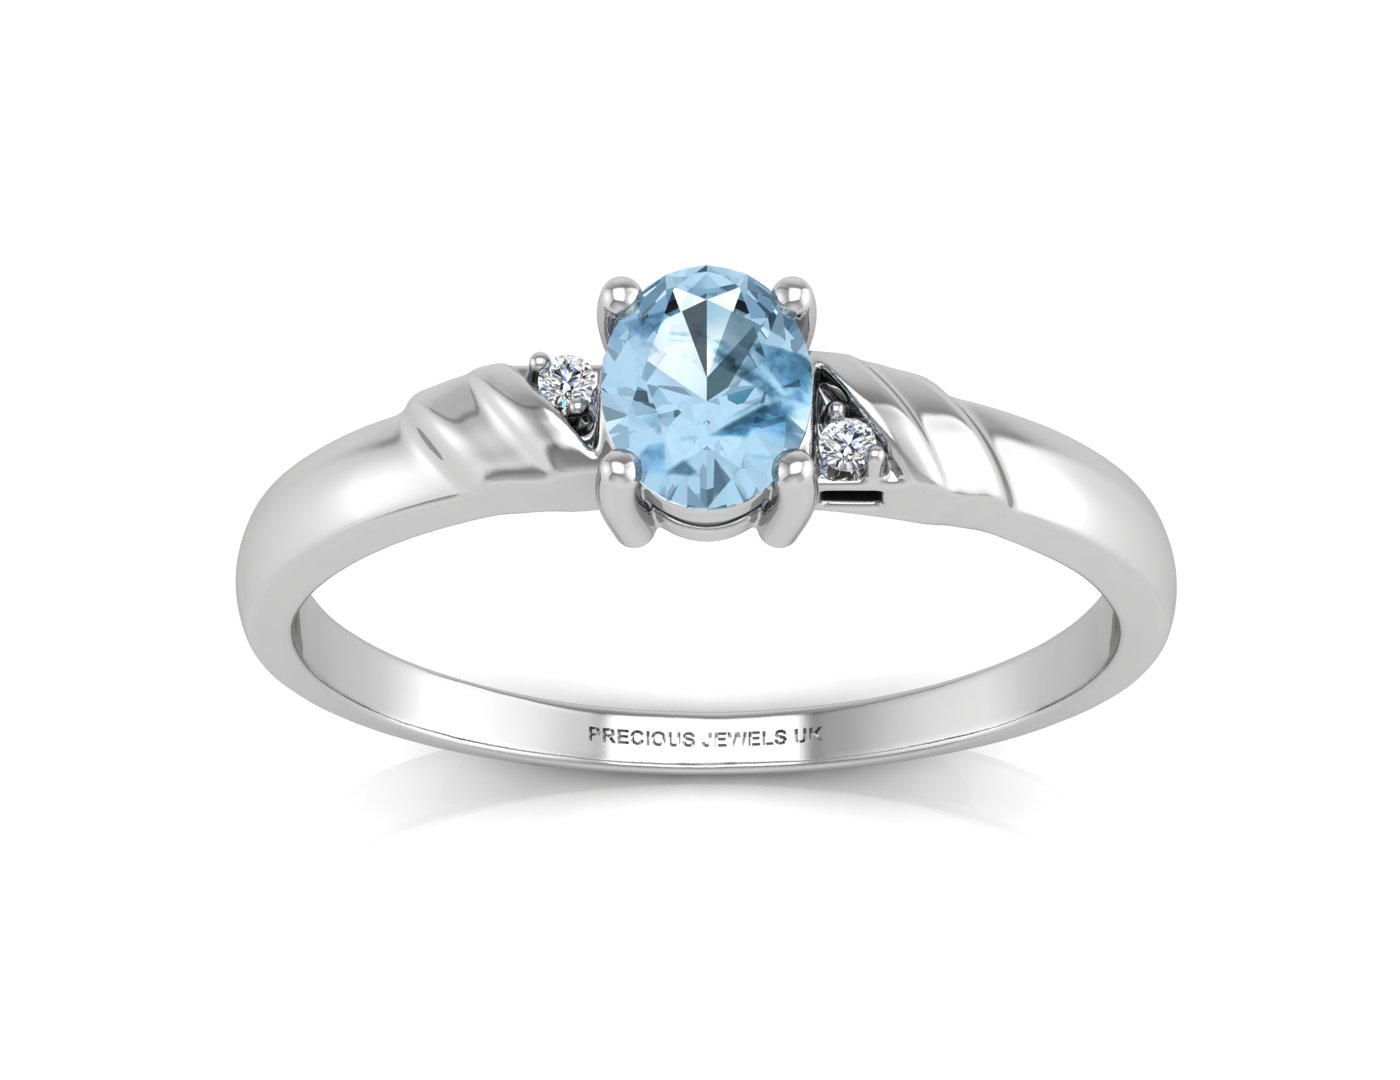 9ct White Gold Diamond And Blue Topaz Ring - Image 3 of 5